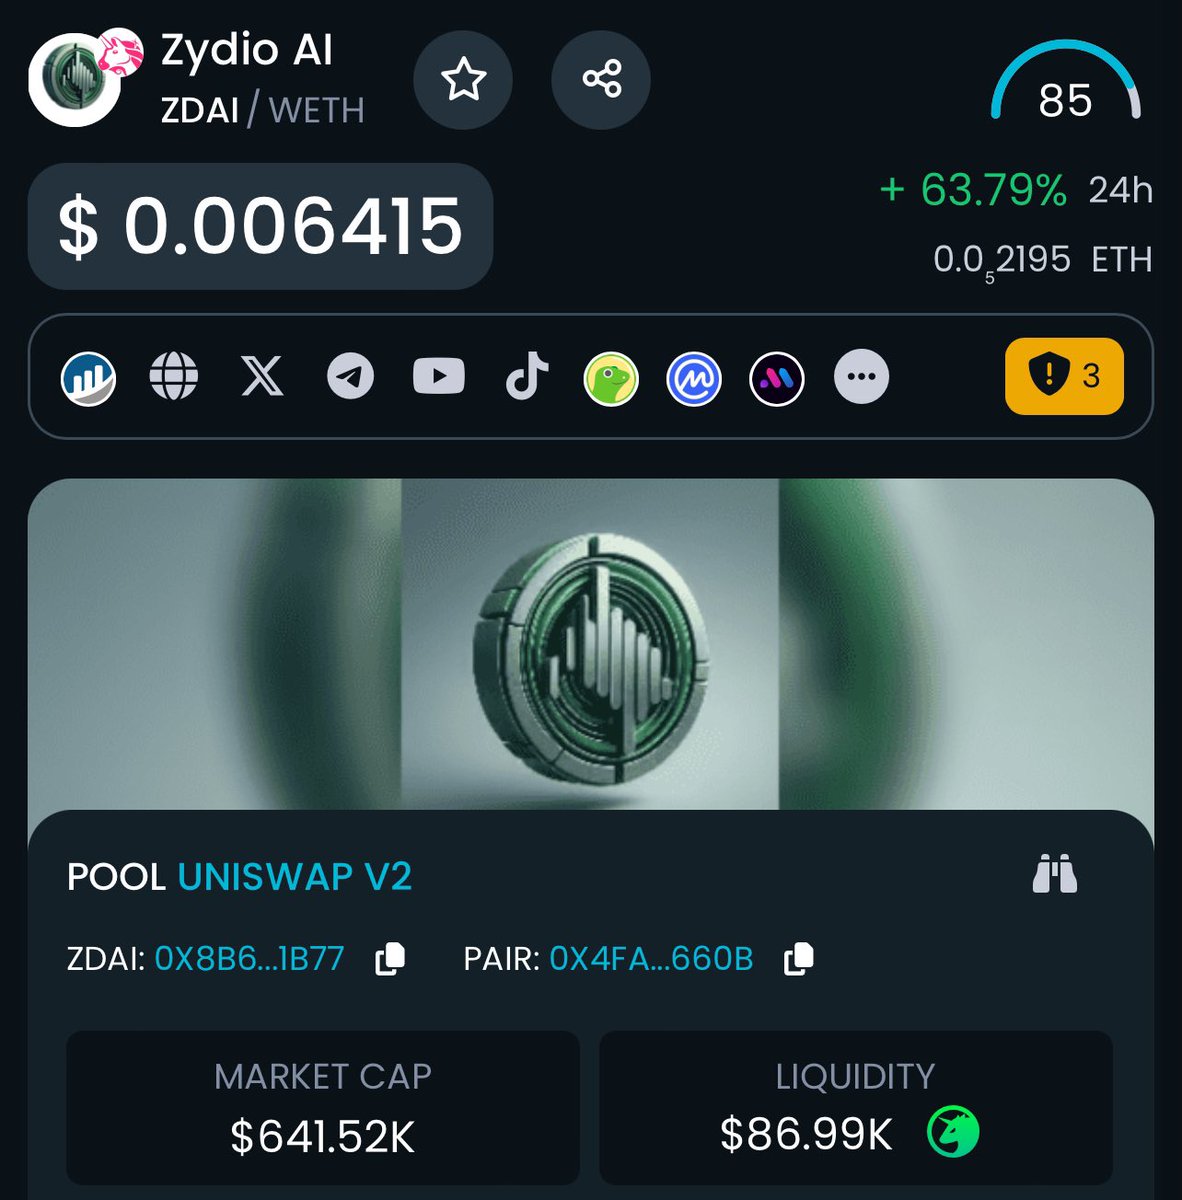 $ZDAI went from $143k cap 🧢 to $1M 🧢 in a matter of days ✅ Going through a correction right now as $1M cap is a psychological target where many sets to take profits at that early Still holding all my coins and won’t sell a single one 🤝 . Send it to $10M ✍️